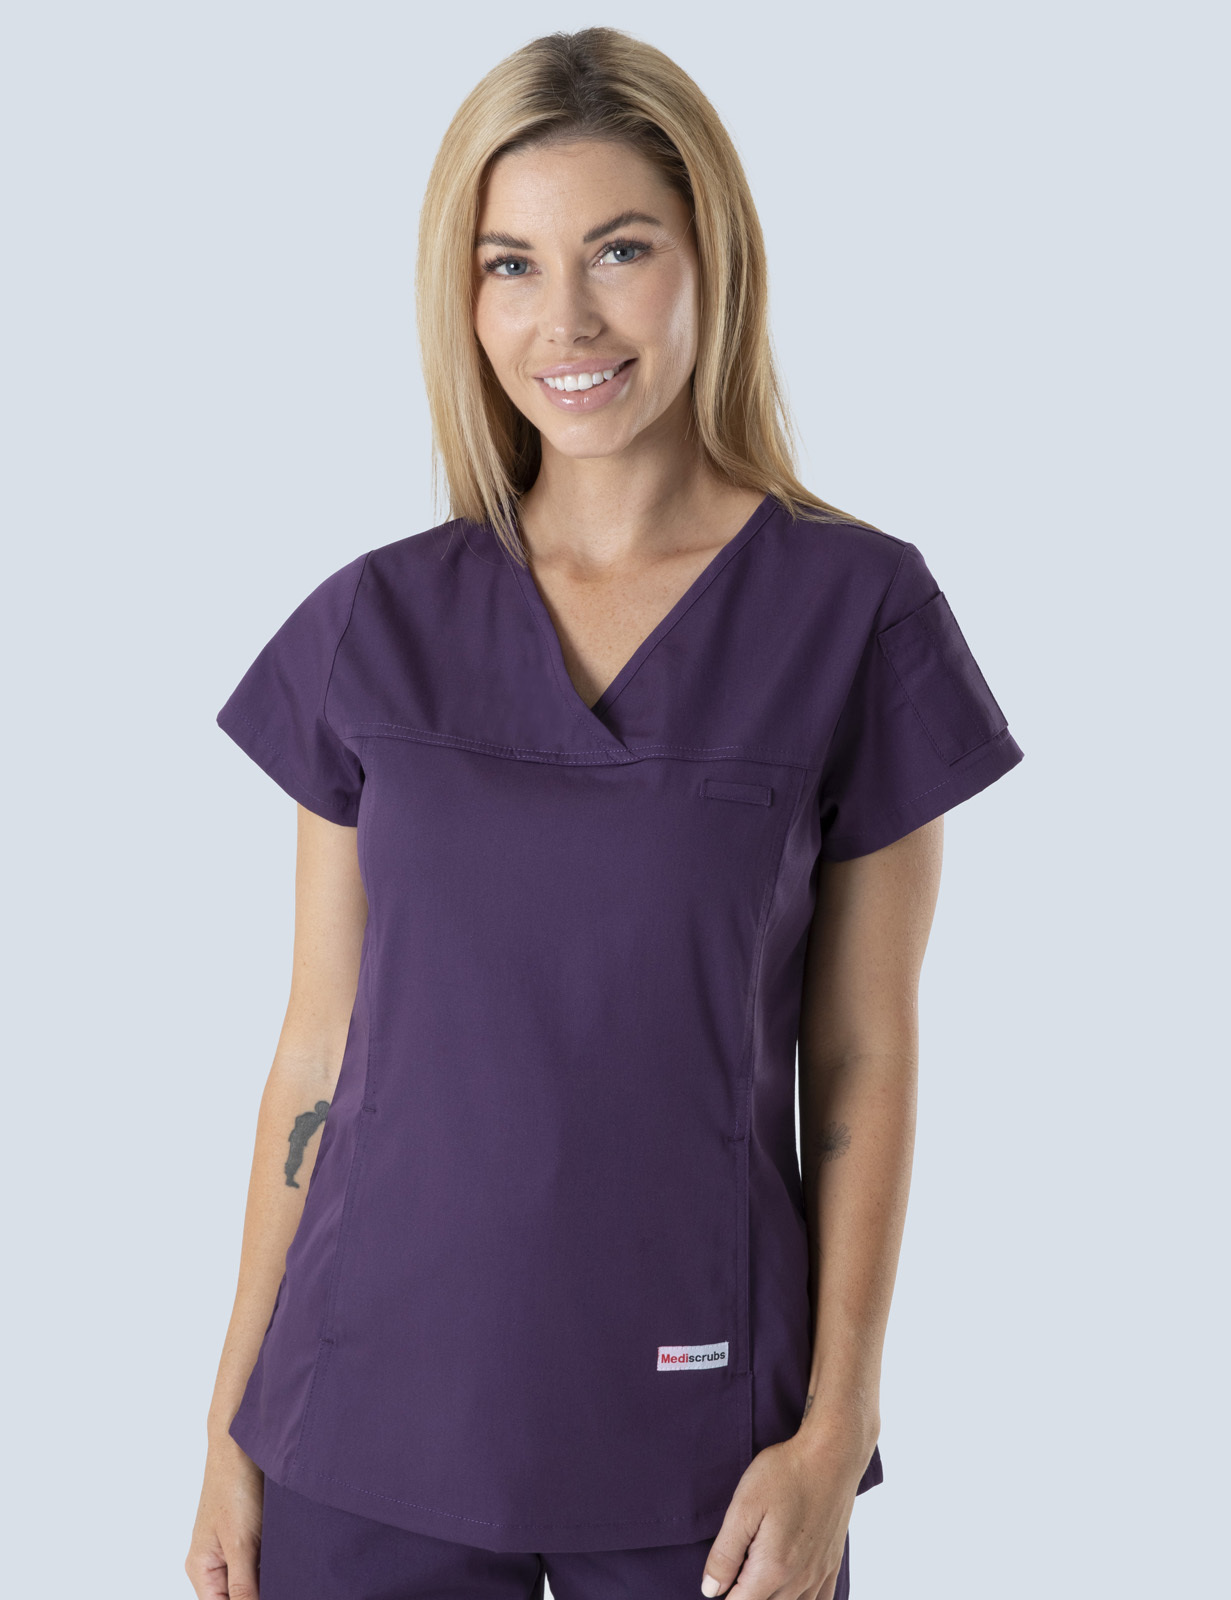 Tweed Hospital Pharmacy - ADMINISTRATION - Aubergine Women's Fit Solid Scrub Top